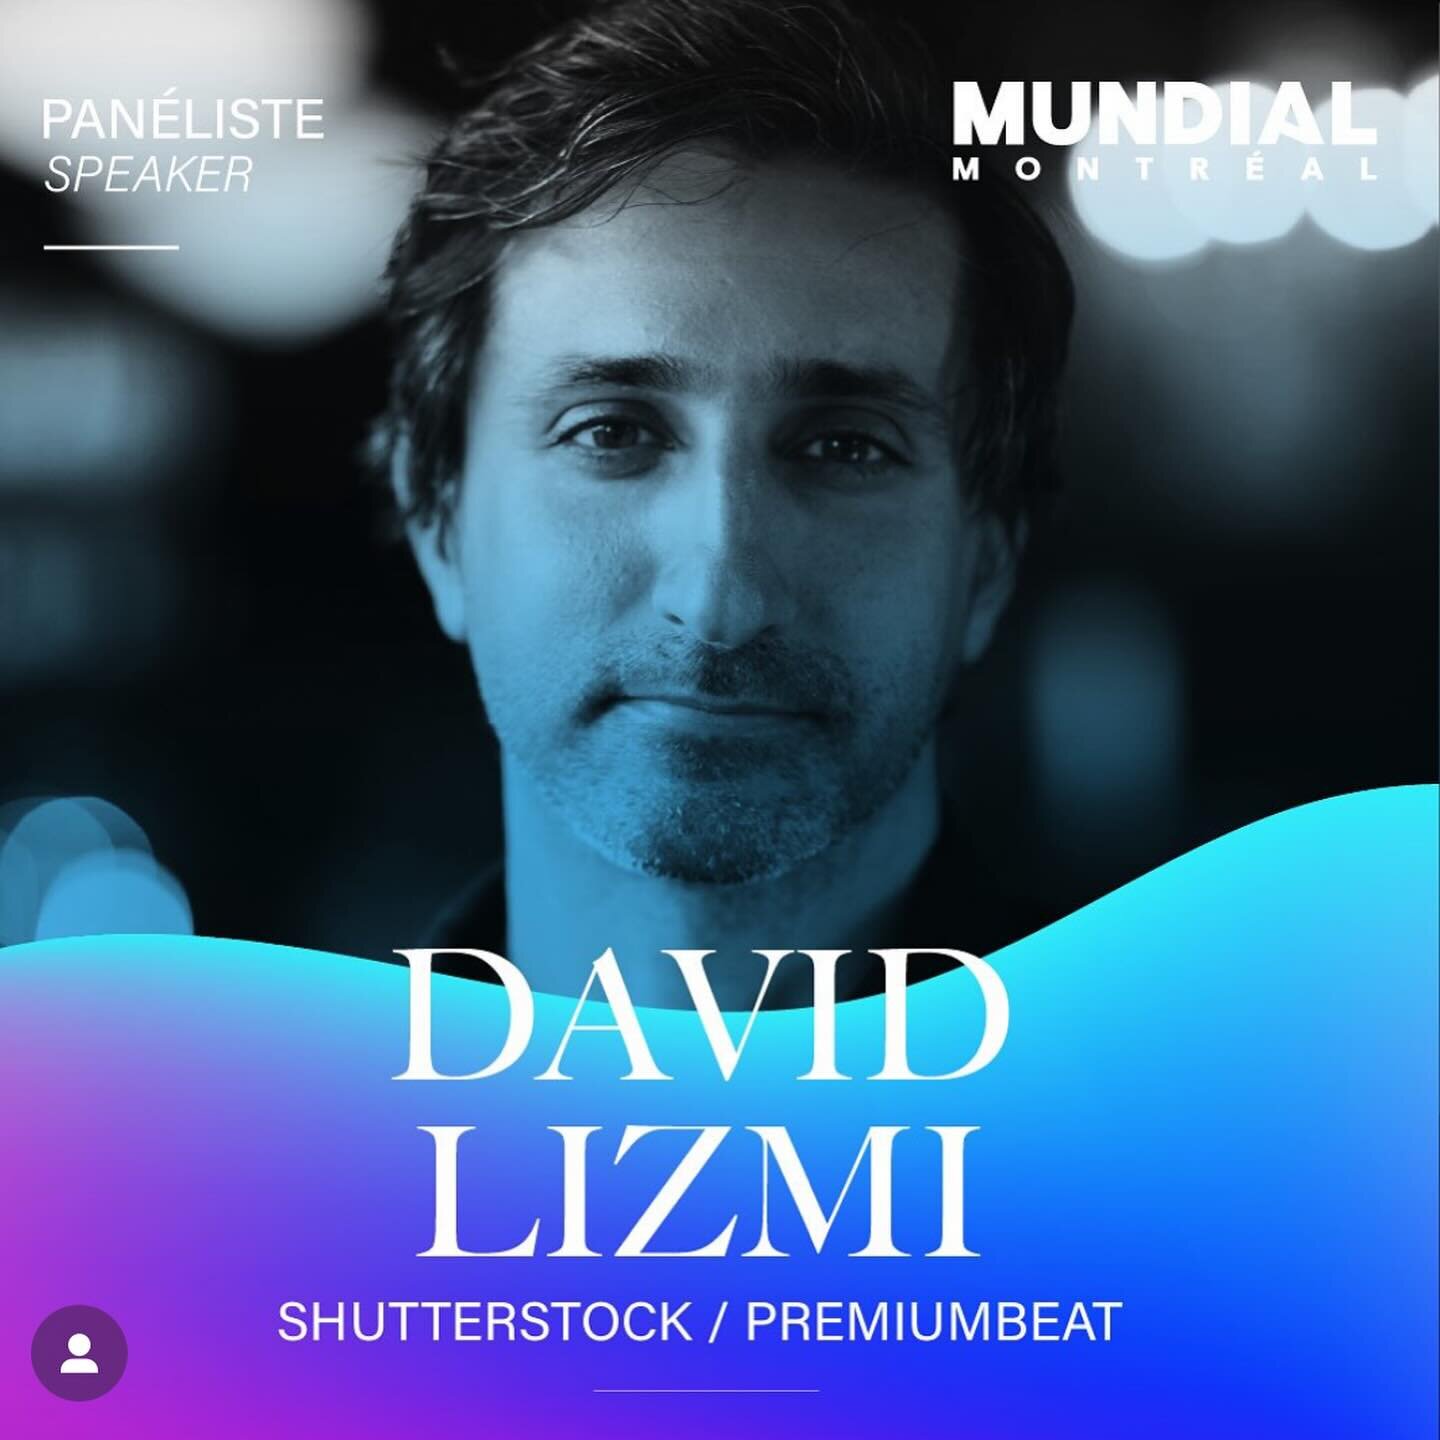 I'm looking forward to being a panelist for @mundialmontreal this 11/16. 
The discussion title is- Sync Universe: Music libraries and synchronization of global sounds for commercial use. In an era where sound libraries are growing exponentially to se